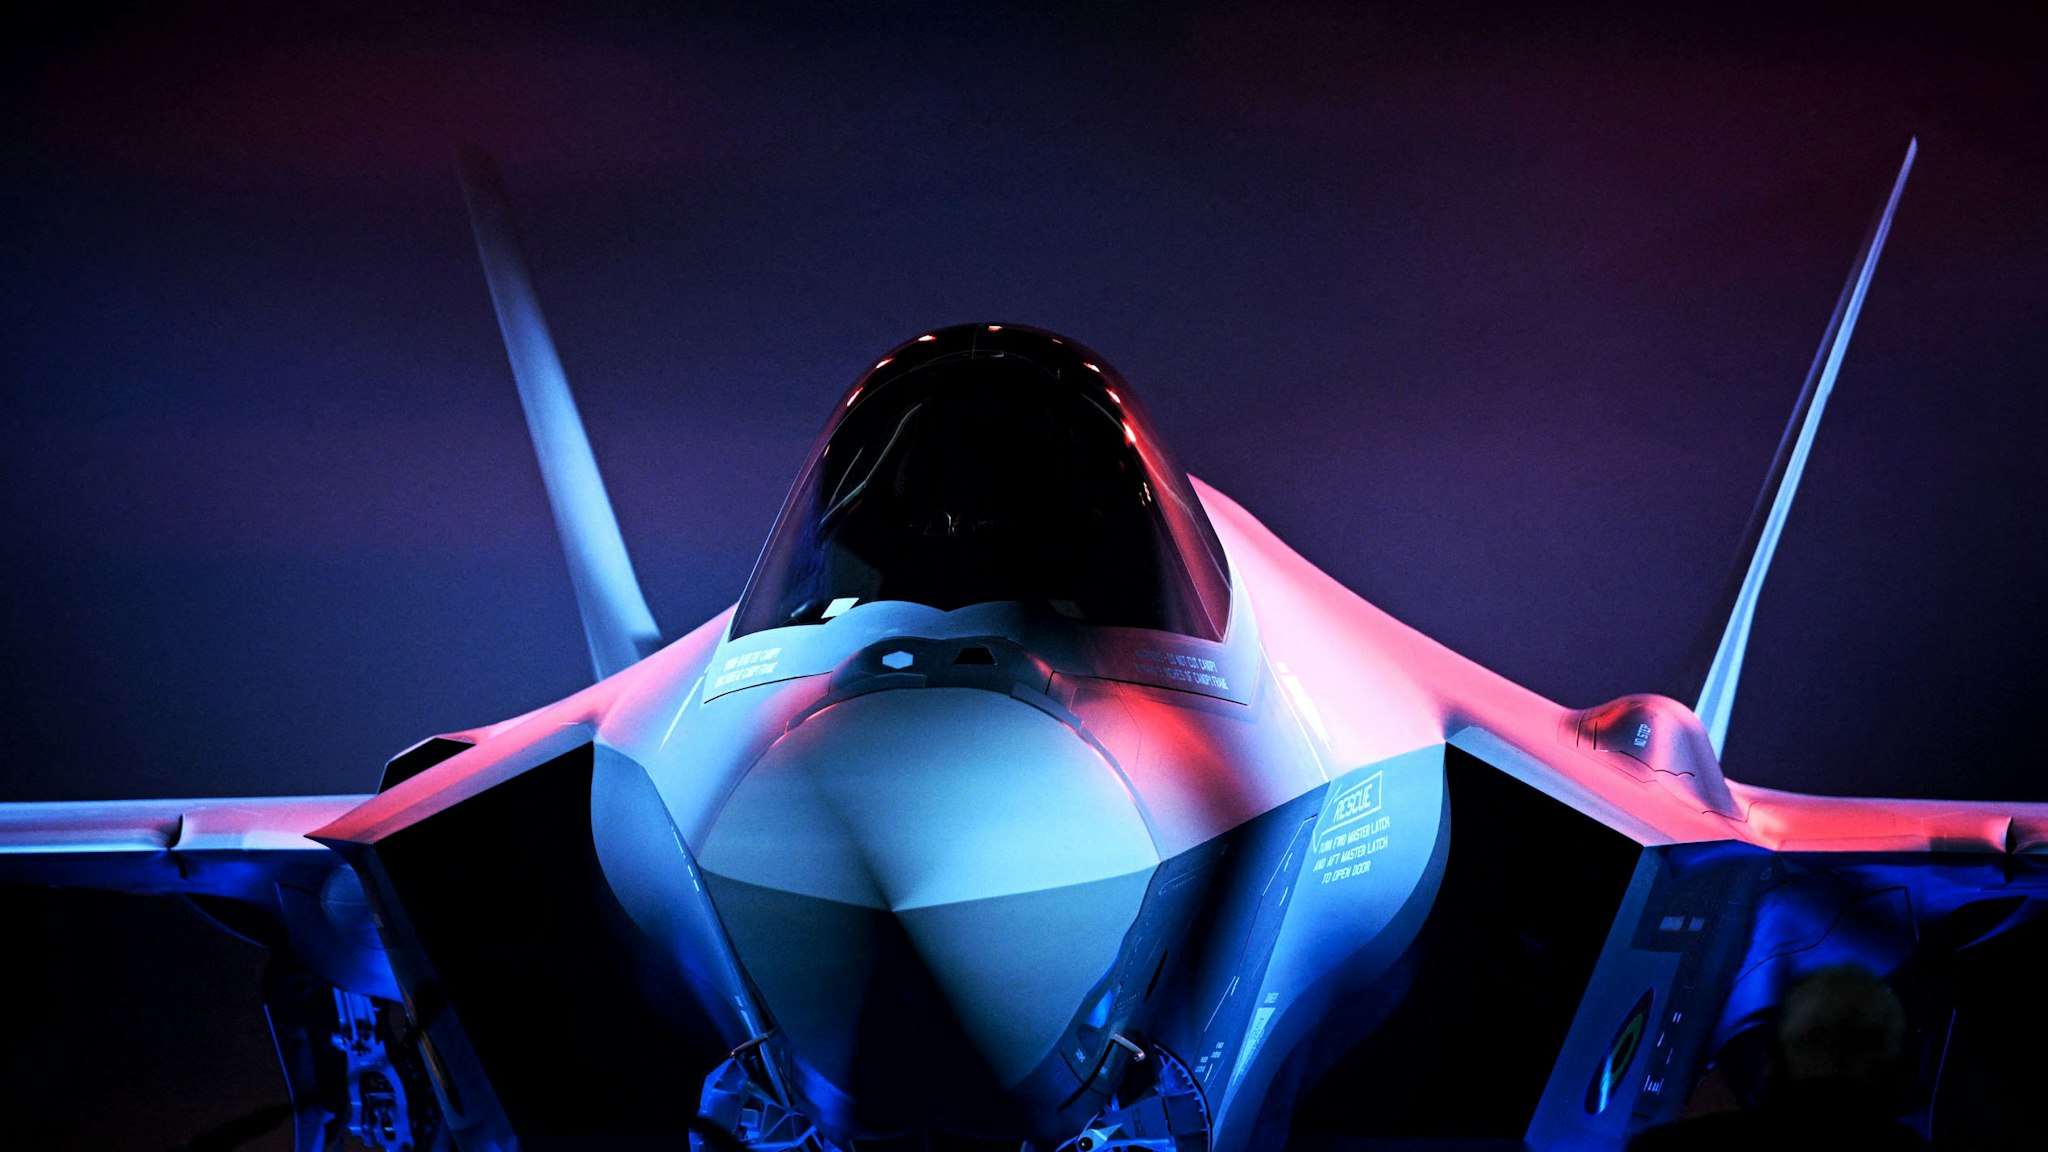 Illustration picture shows a F35 fighter aircraft during a visit to the Lockheed Martin aerospace and defense company in Fort Worth, state of Texas, United States of America on Sunday 10 December 2023.